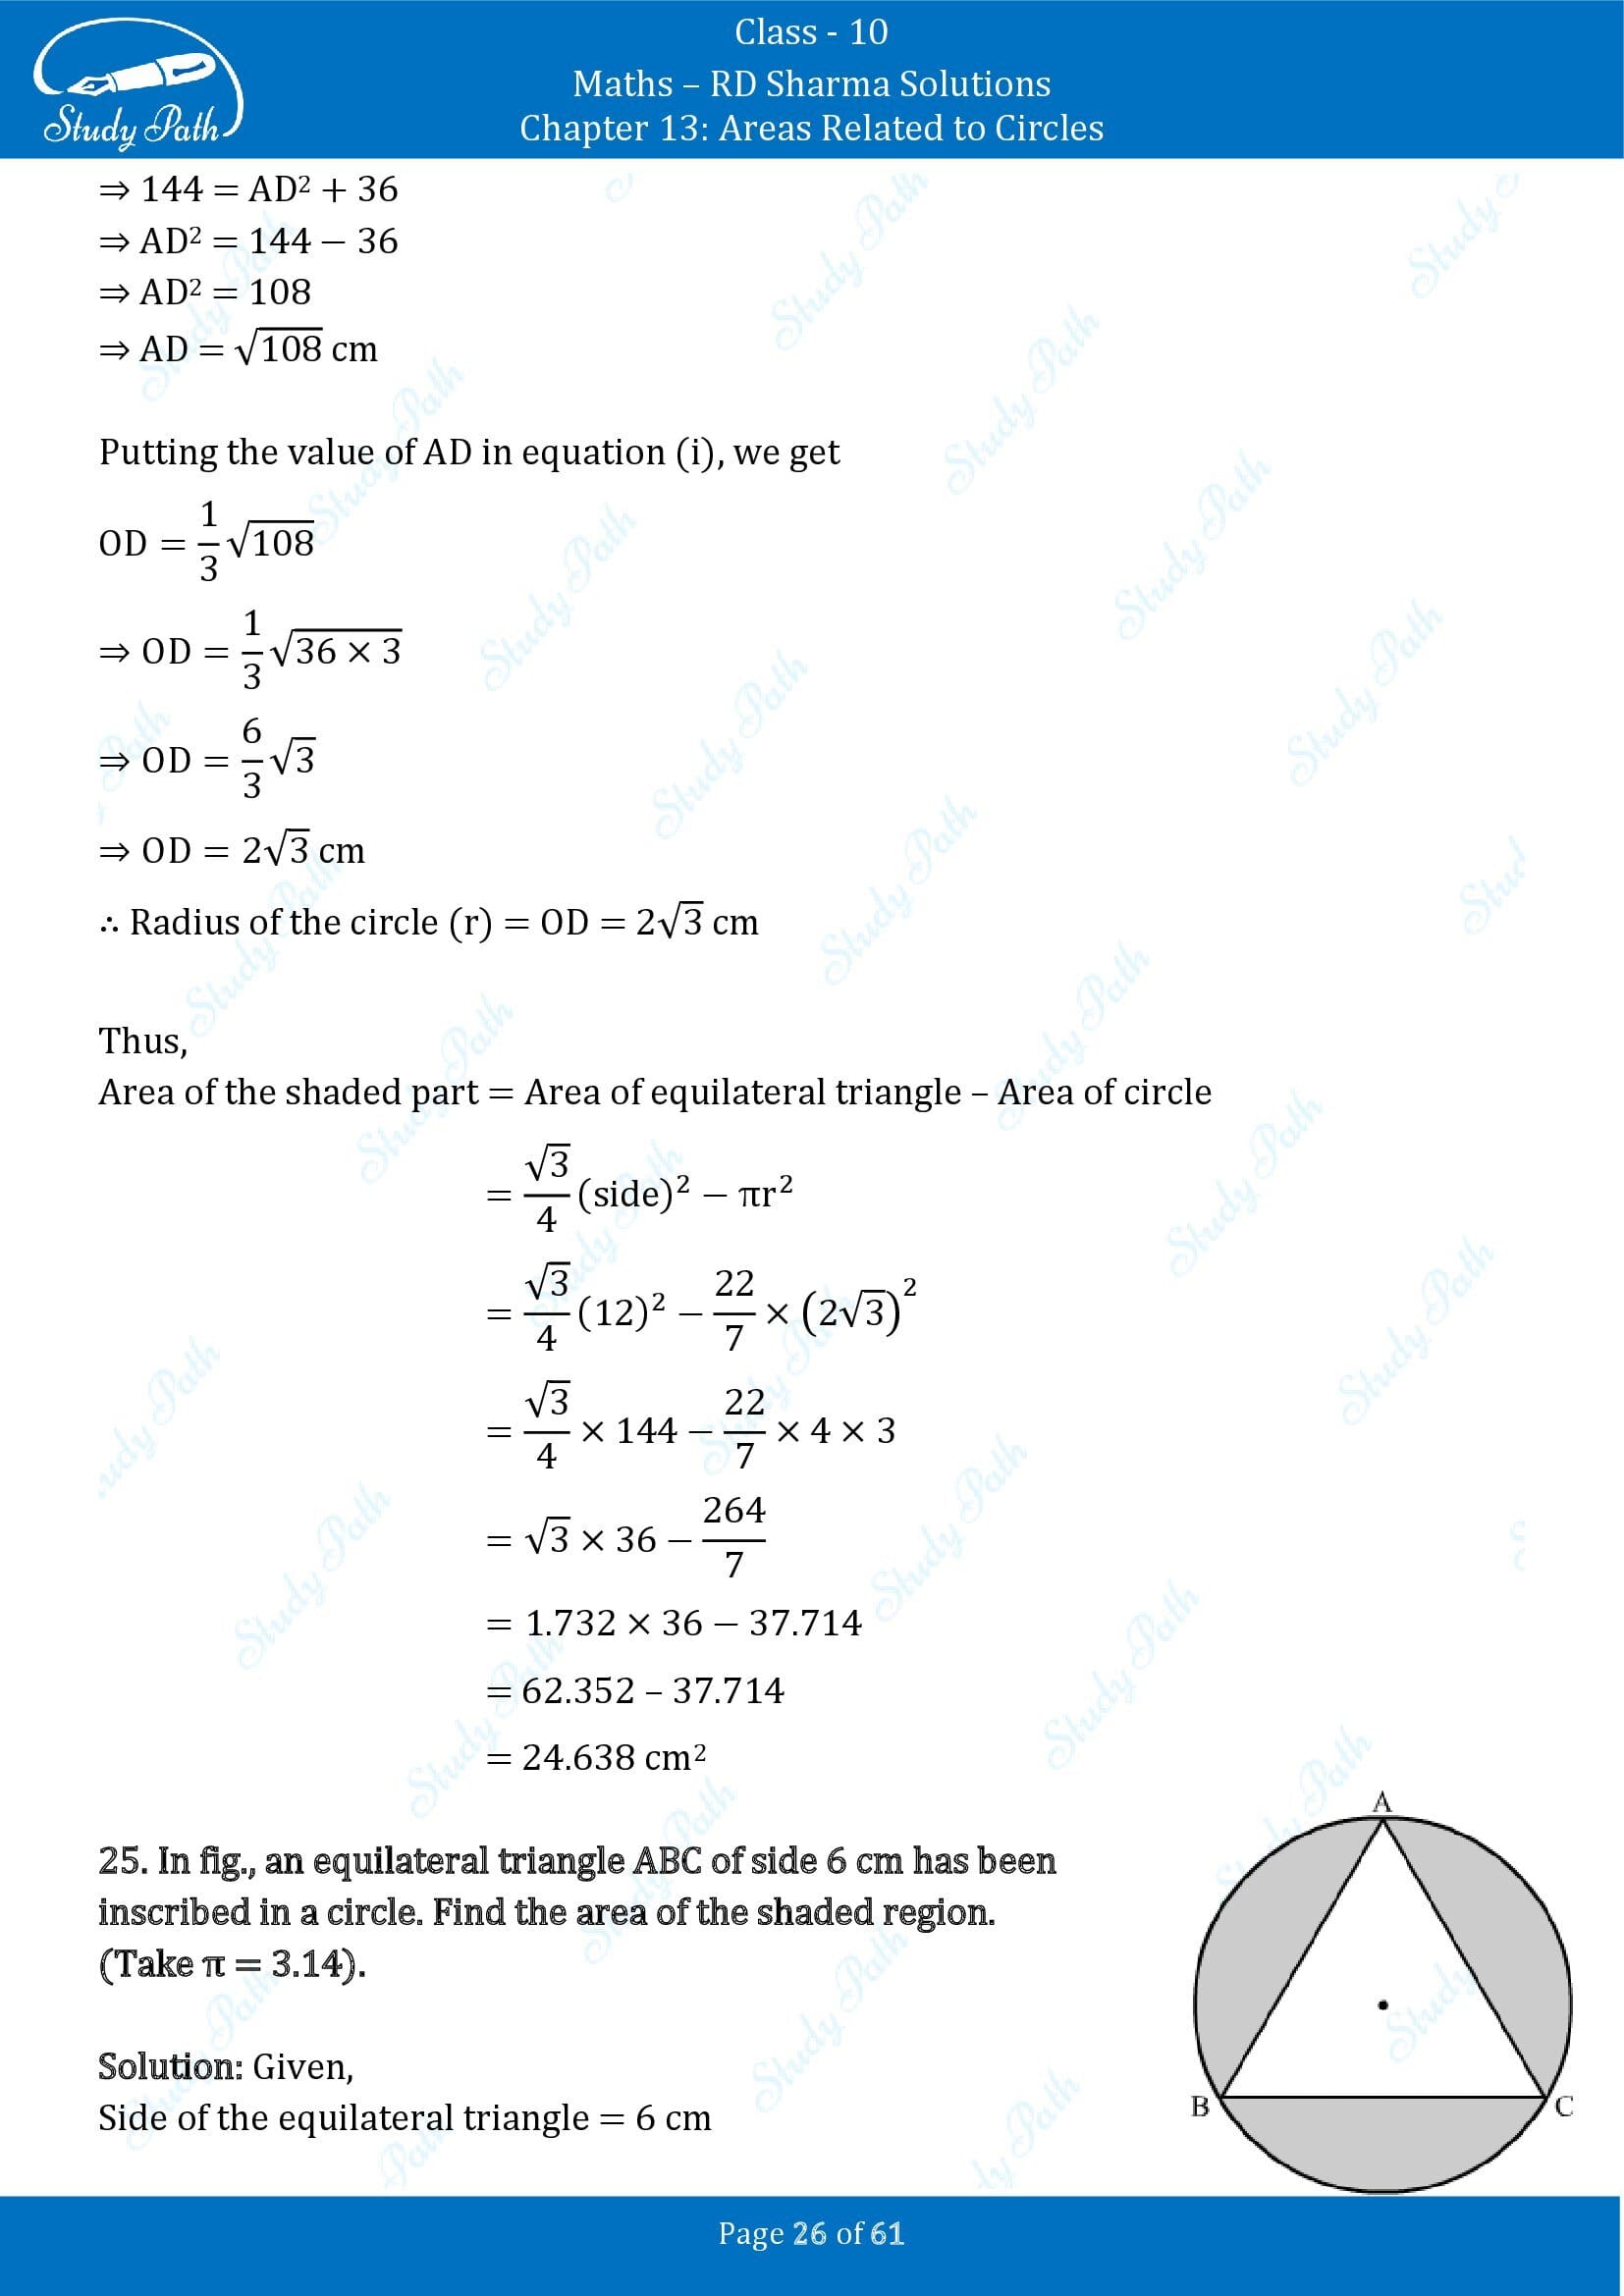 RD Sharma Solutions Class 10 Chapter 13 Areas Related to Circles Exercise 13.4 00026